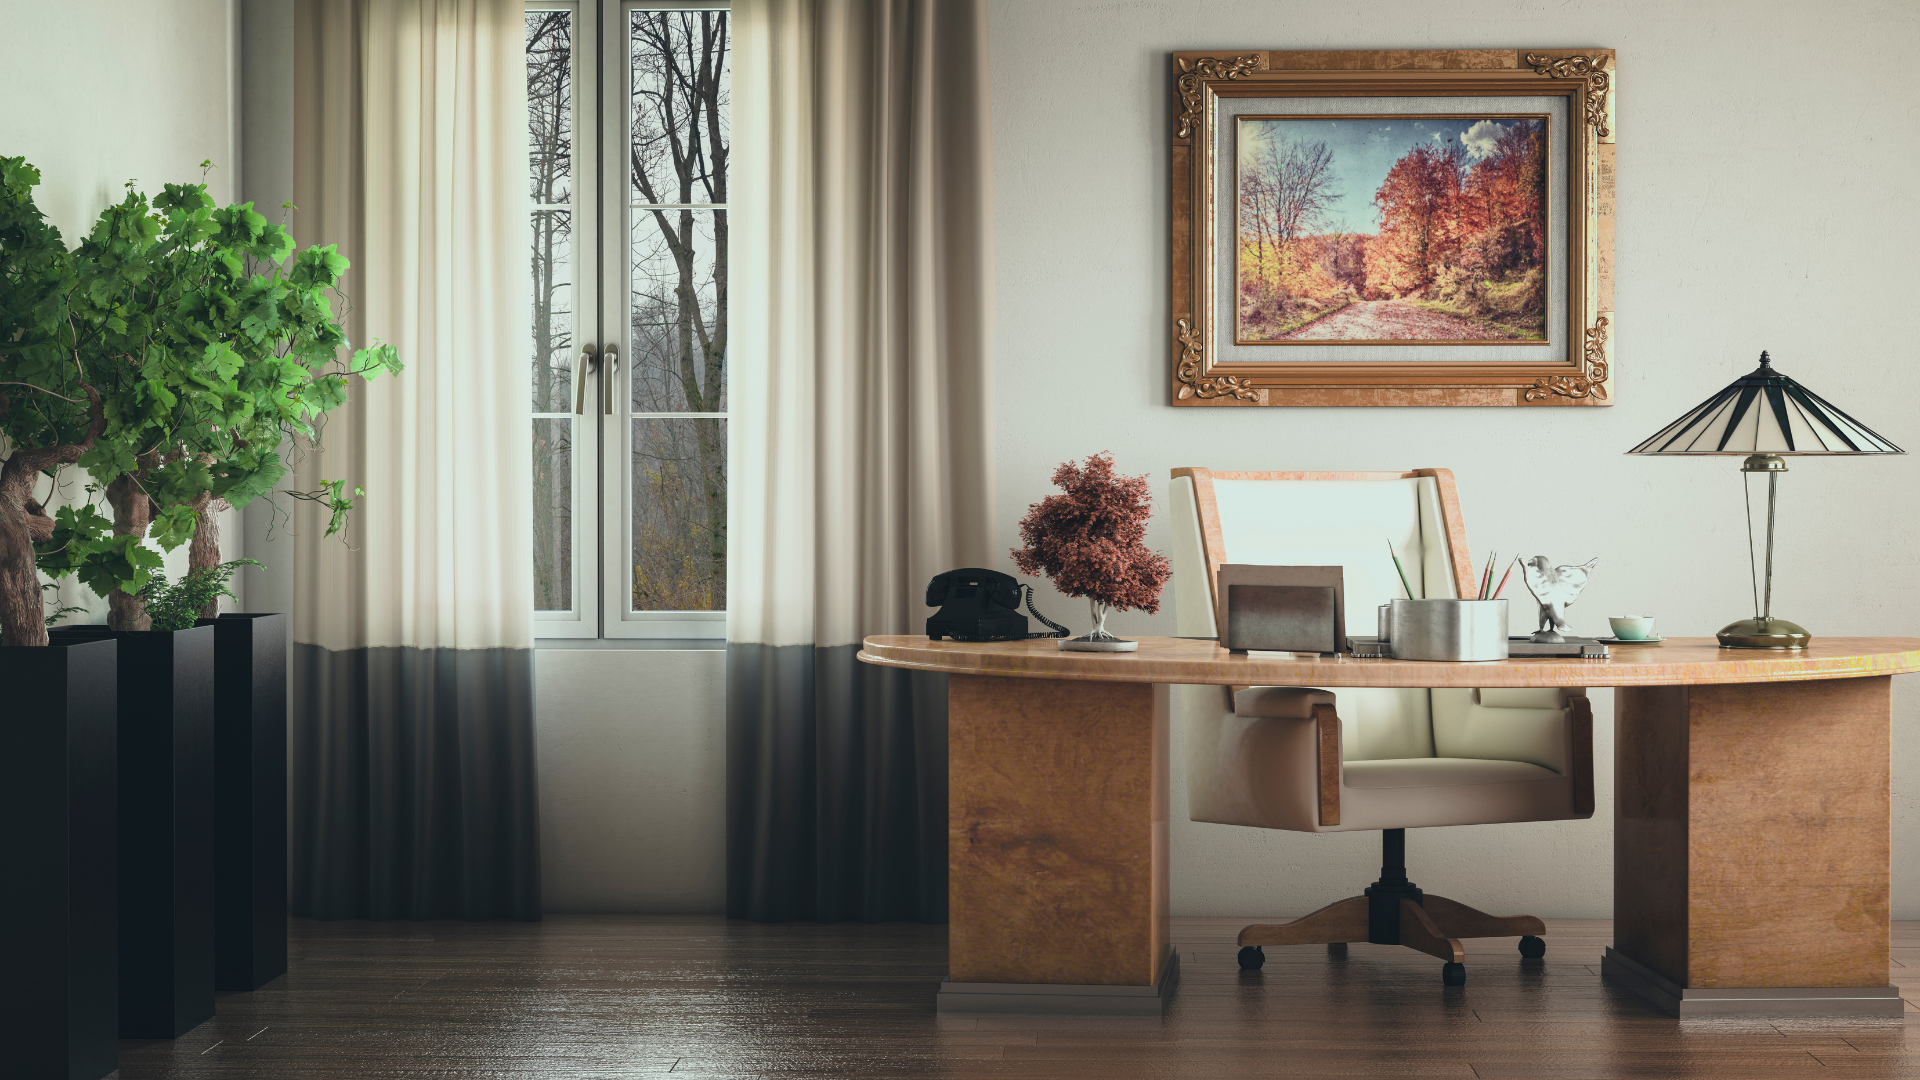 5 Tips for Buying Art for The Office